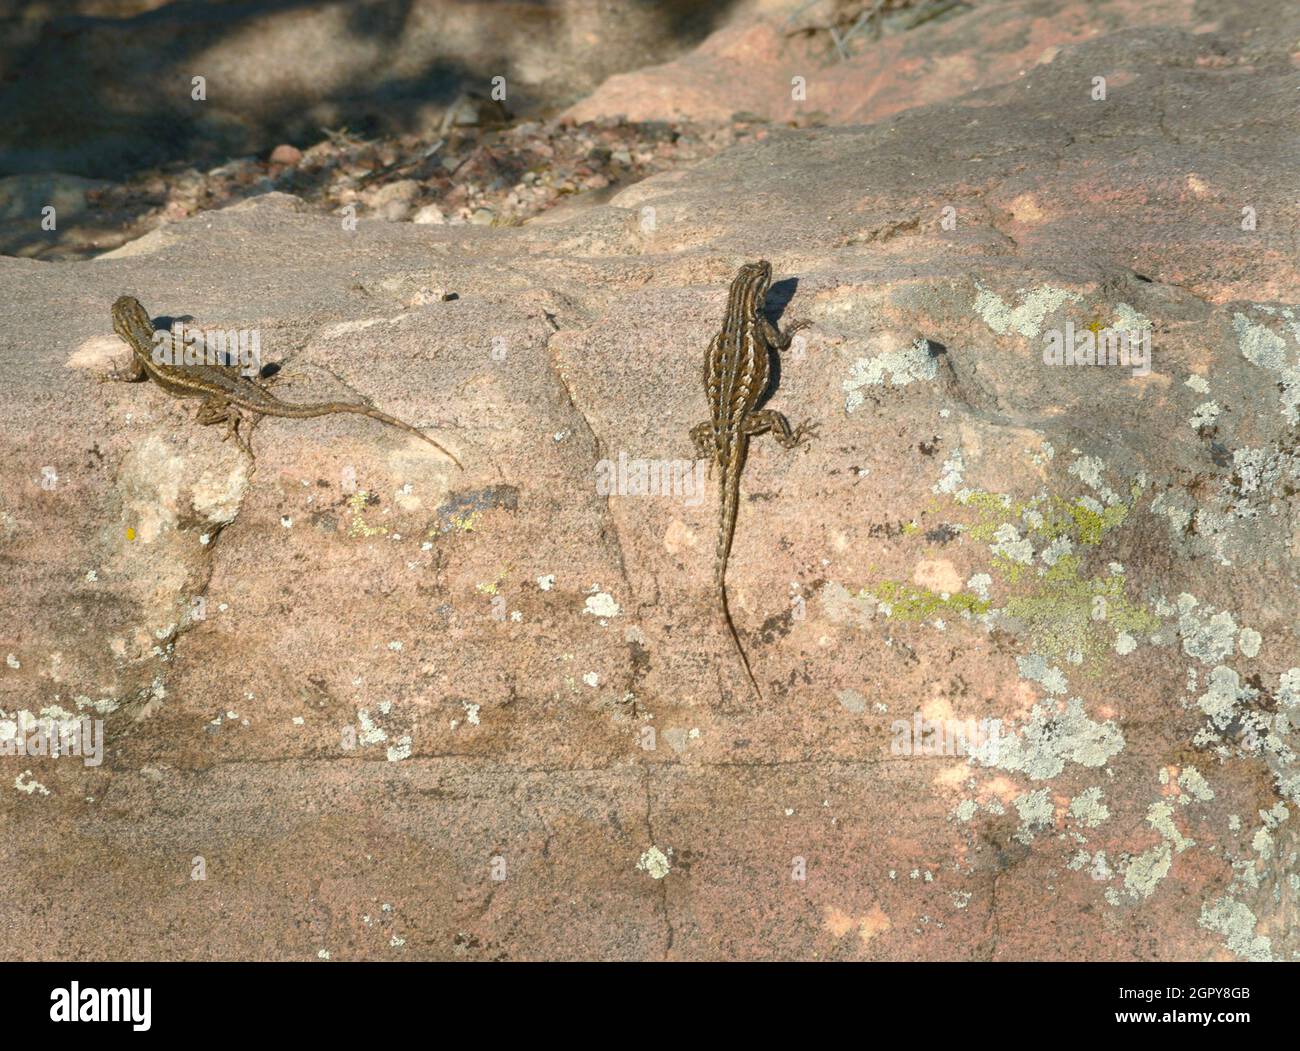 A pair of sagebrush lizards (Sceloporus gracious) soak up the warming sun on a rock in New Mexico. Stock Photo